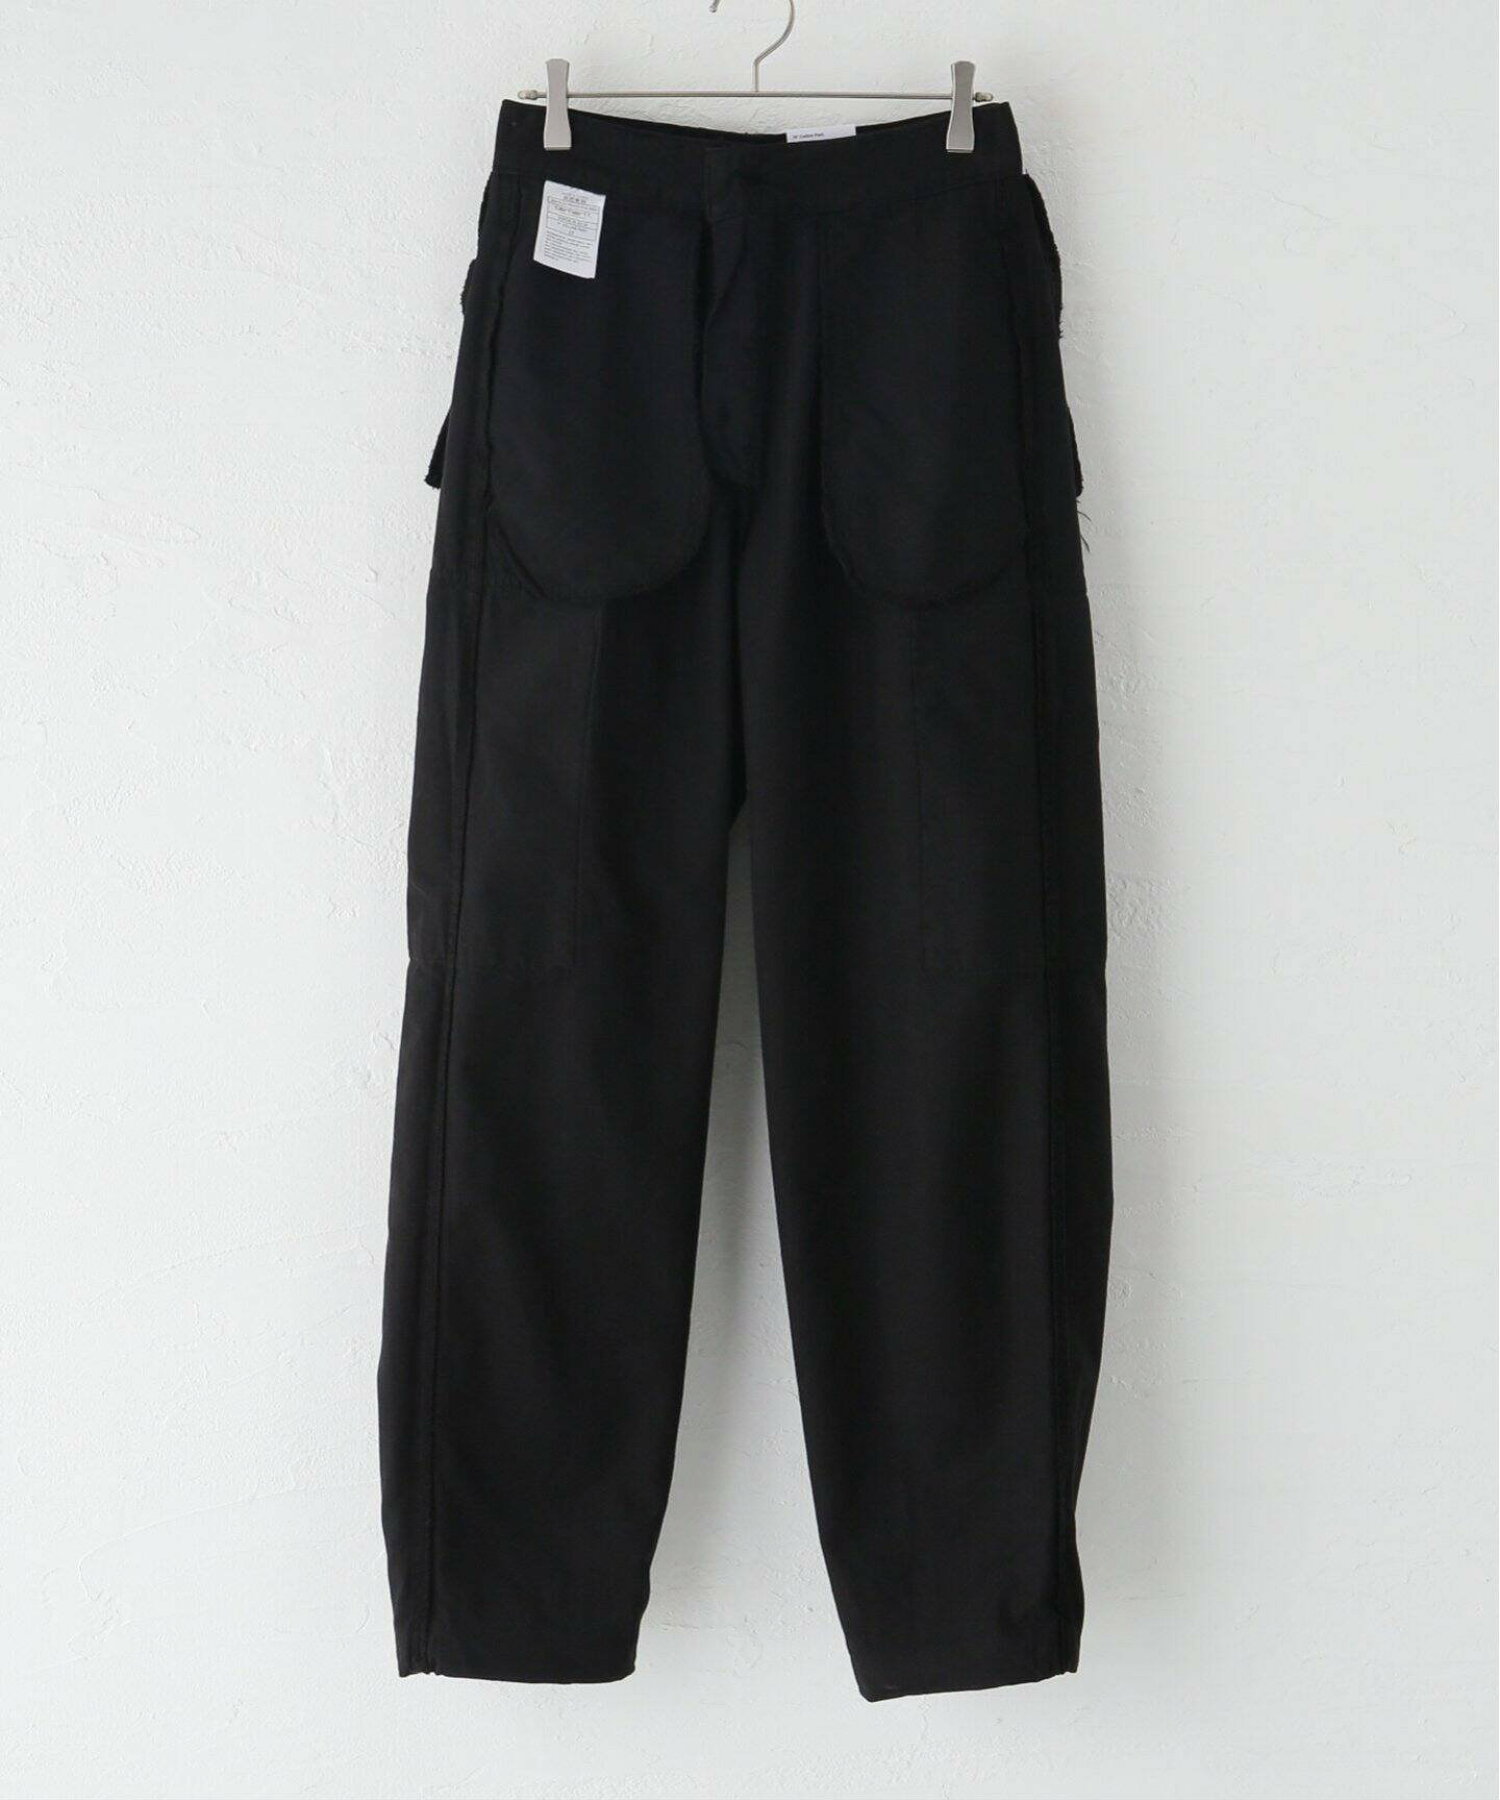 W COLLINS PANT │ Carhartt WIP